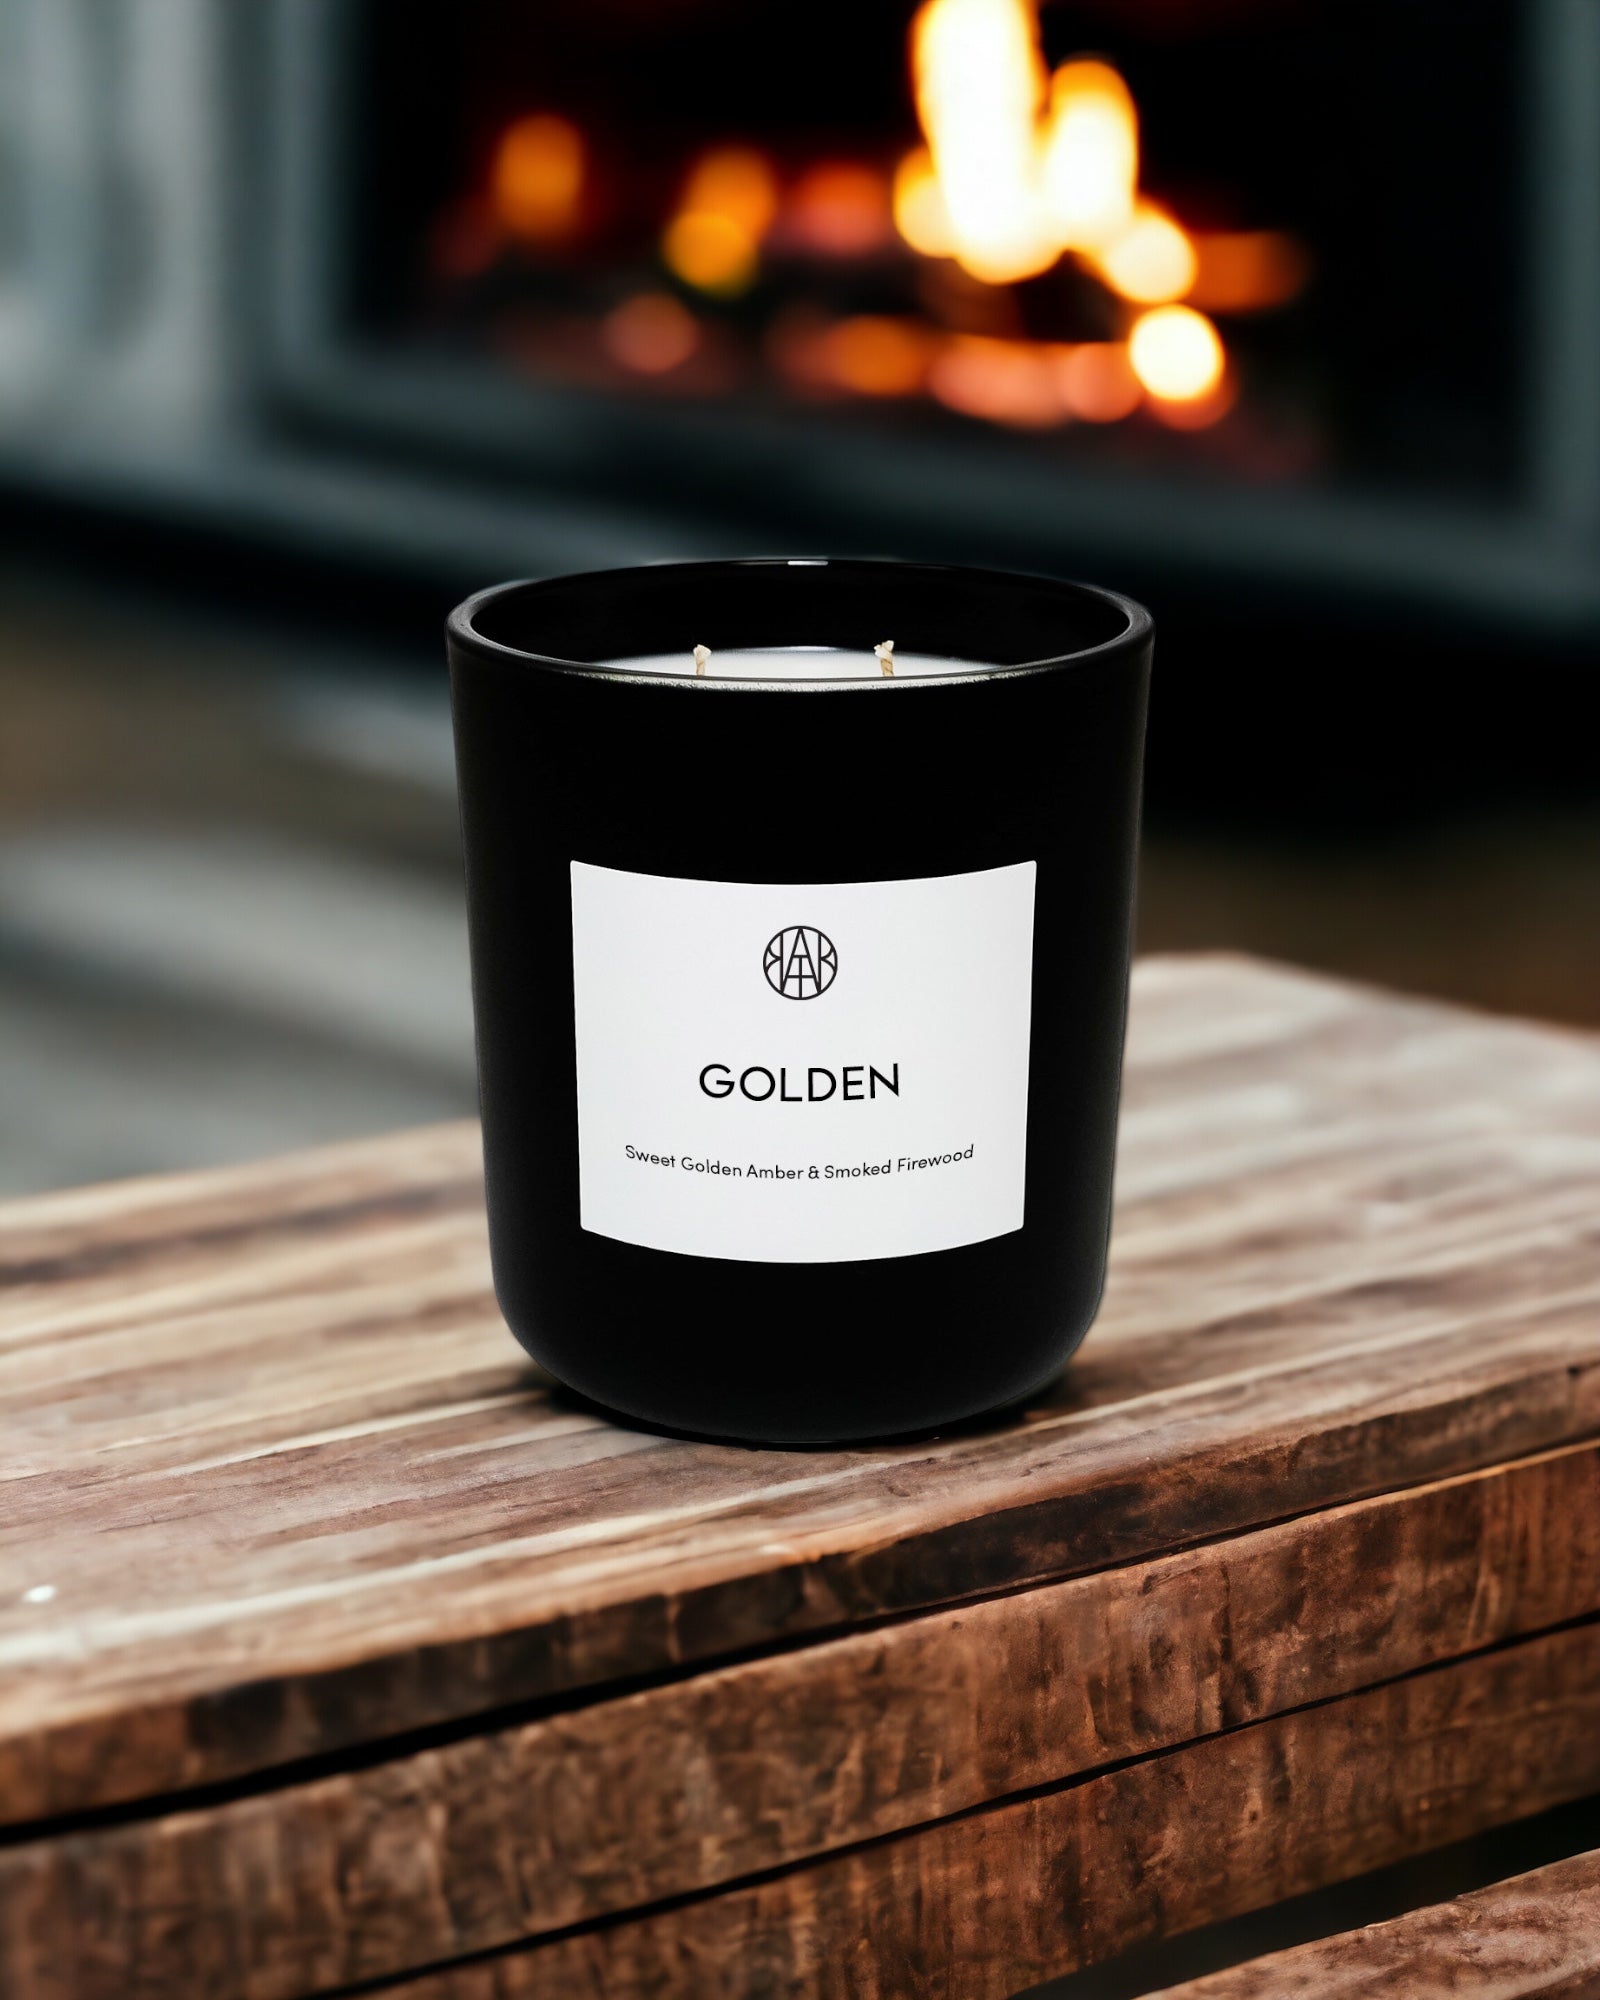 GOLDEN - Deluxe Candle - AEMBR - Clean Luxury Candles, Wax Melts & Laundry Care